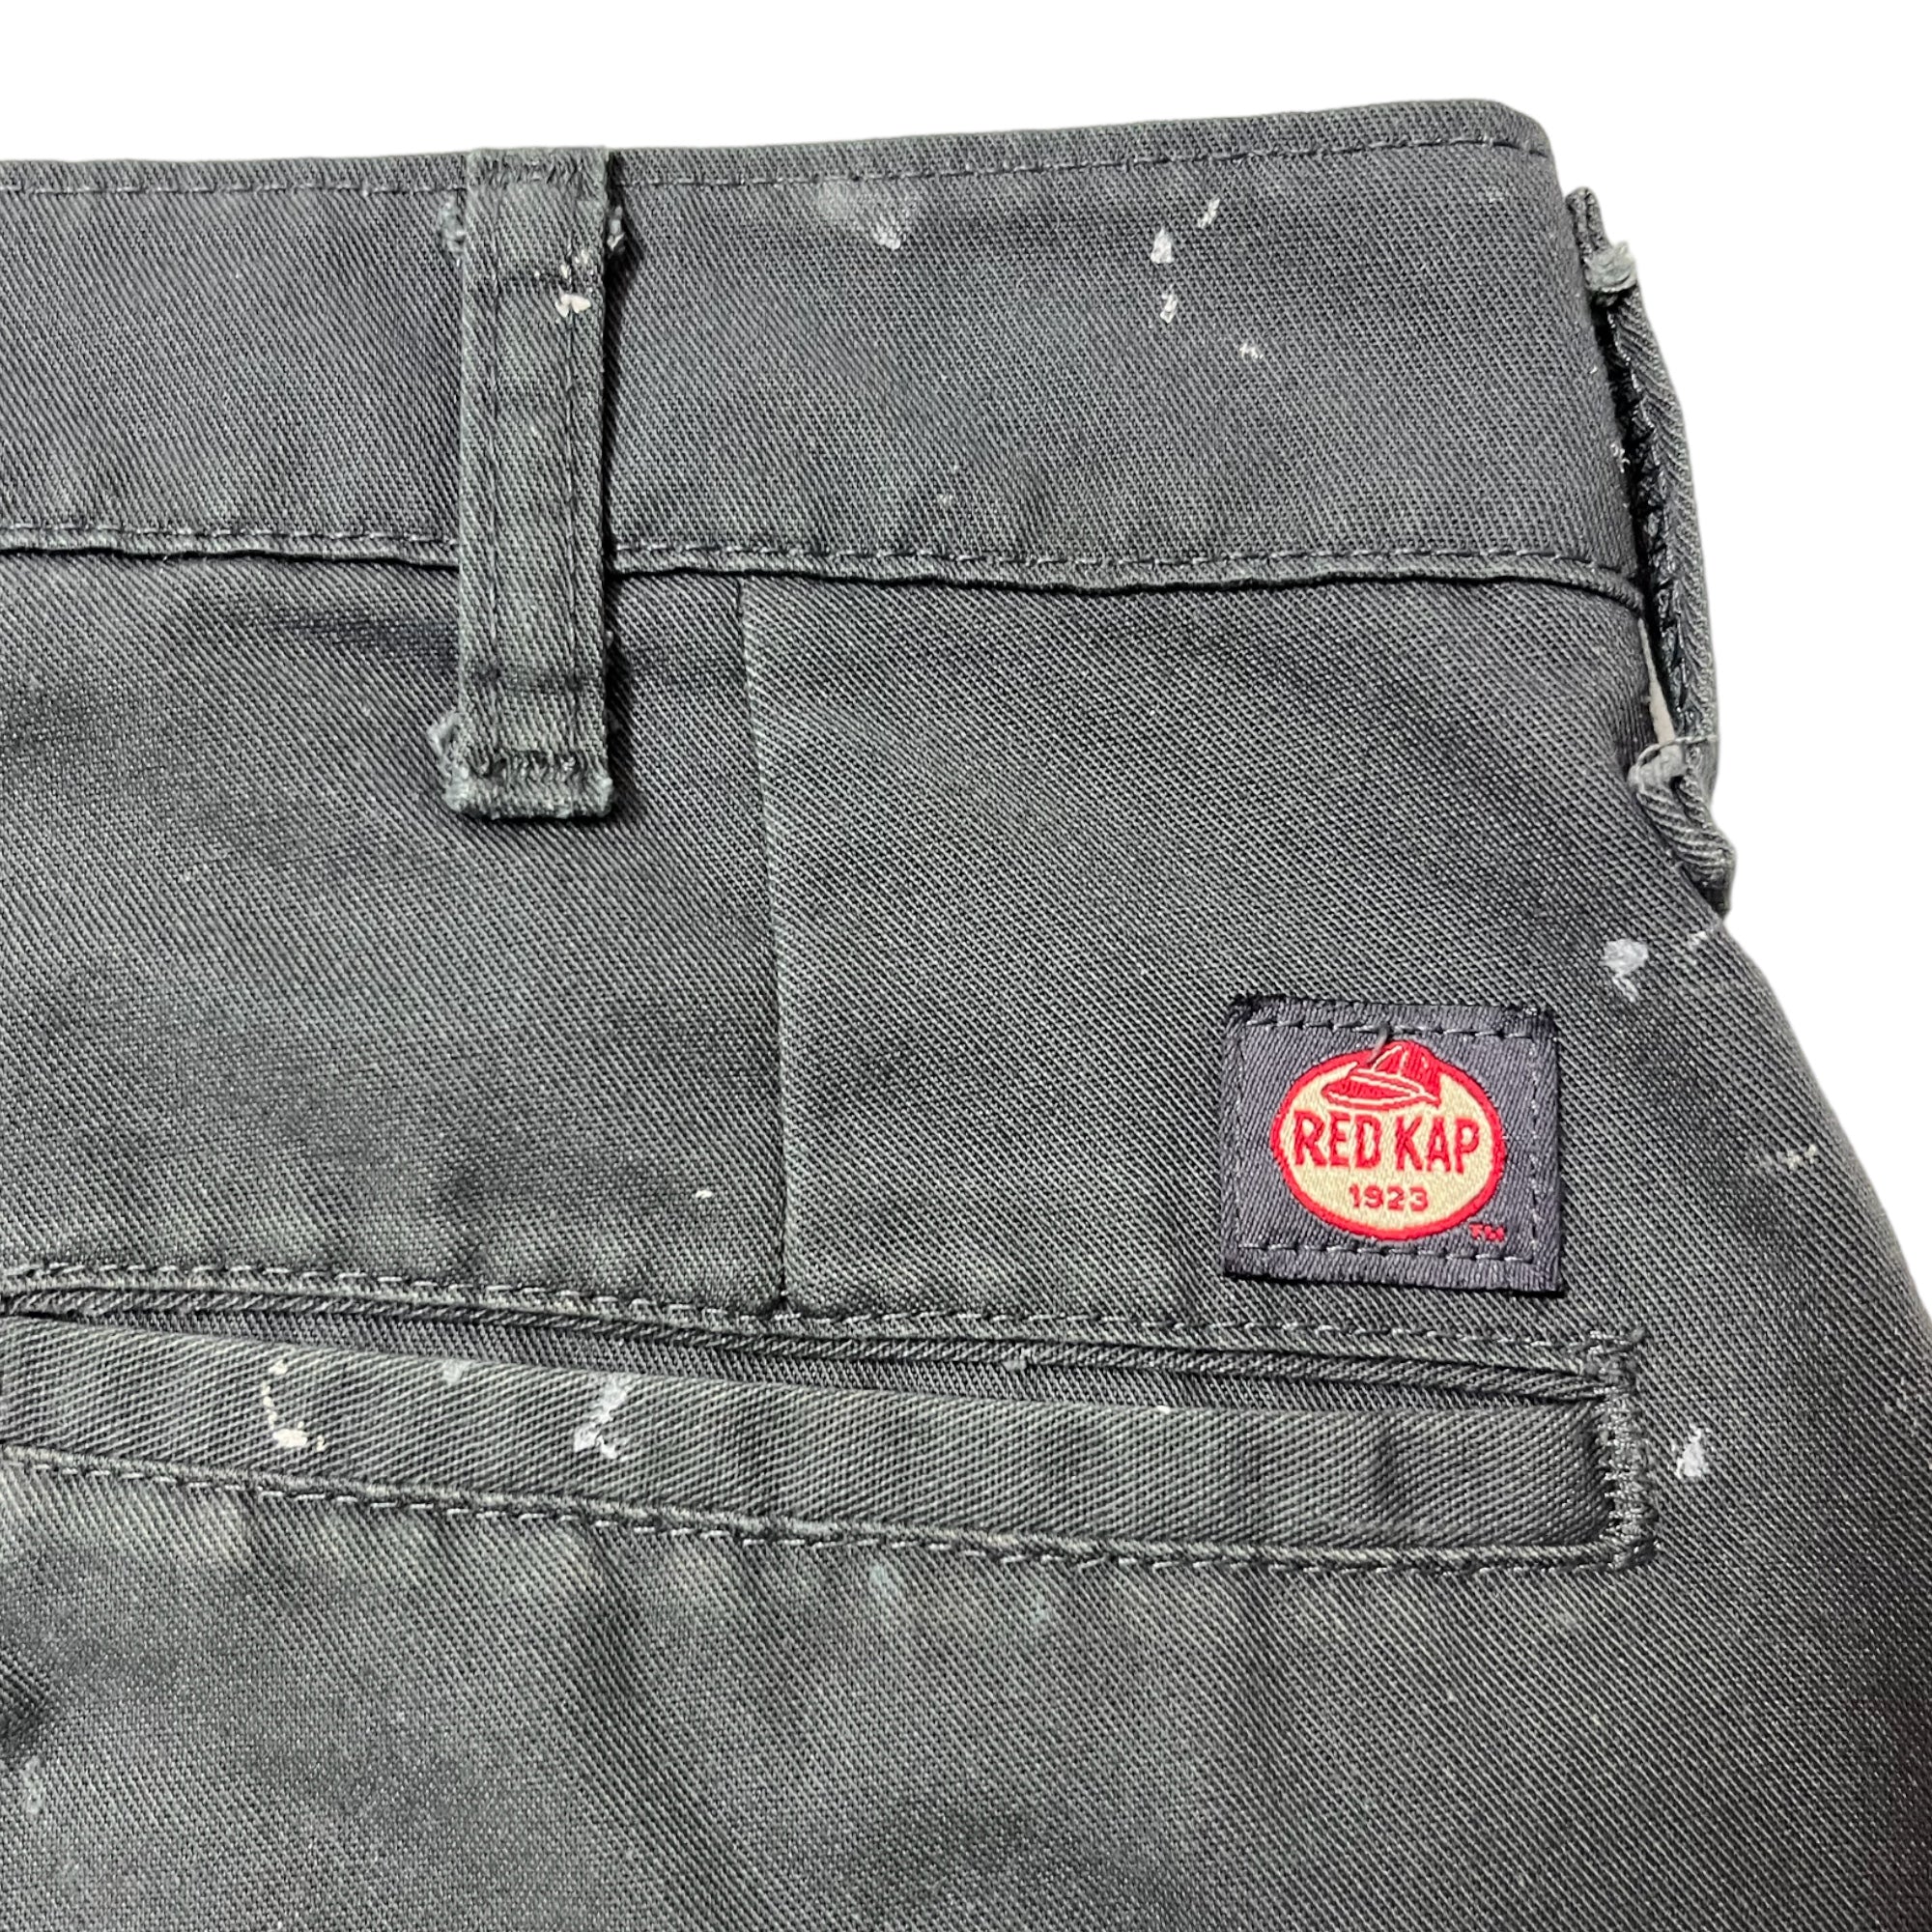 1980s Paint Distressed Red Kap Work Pants - Faded Black/Charcoal - 32x32